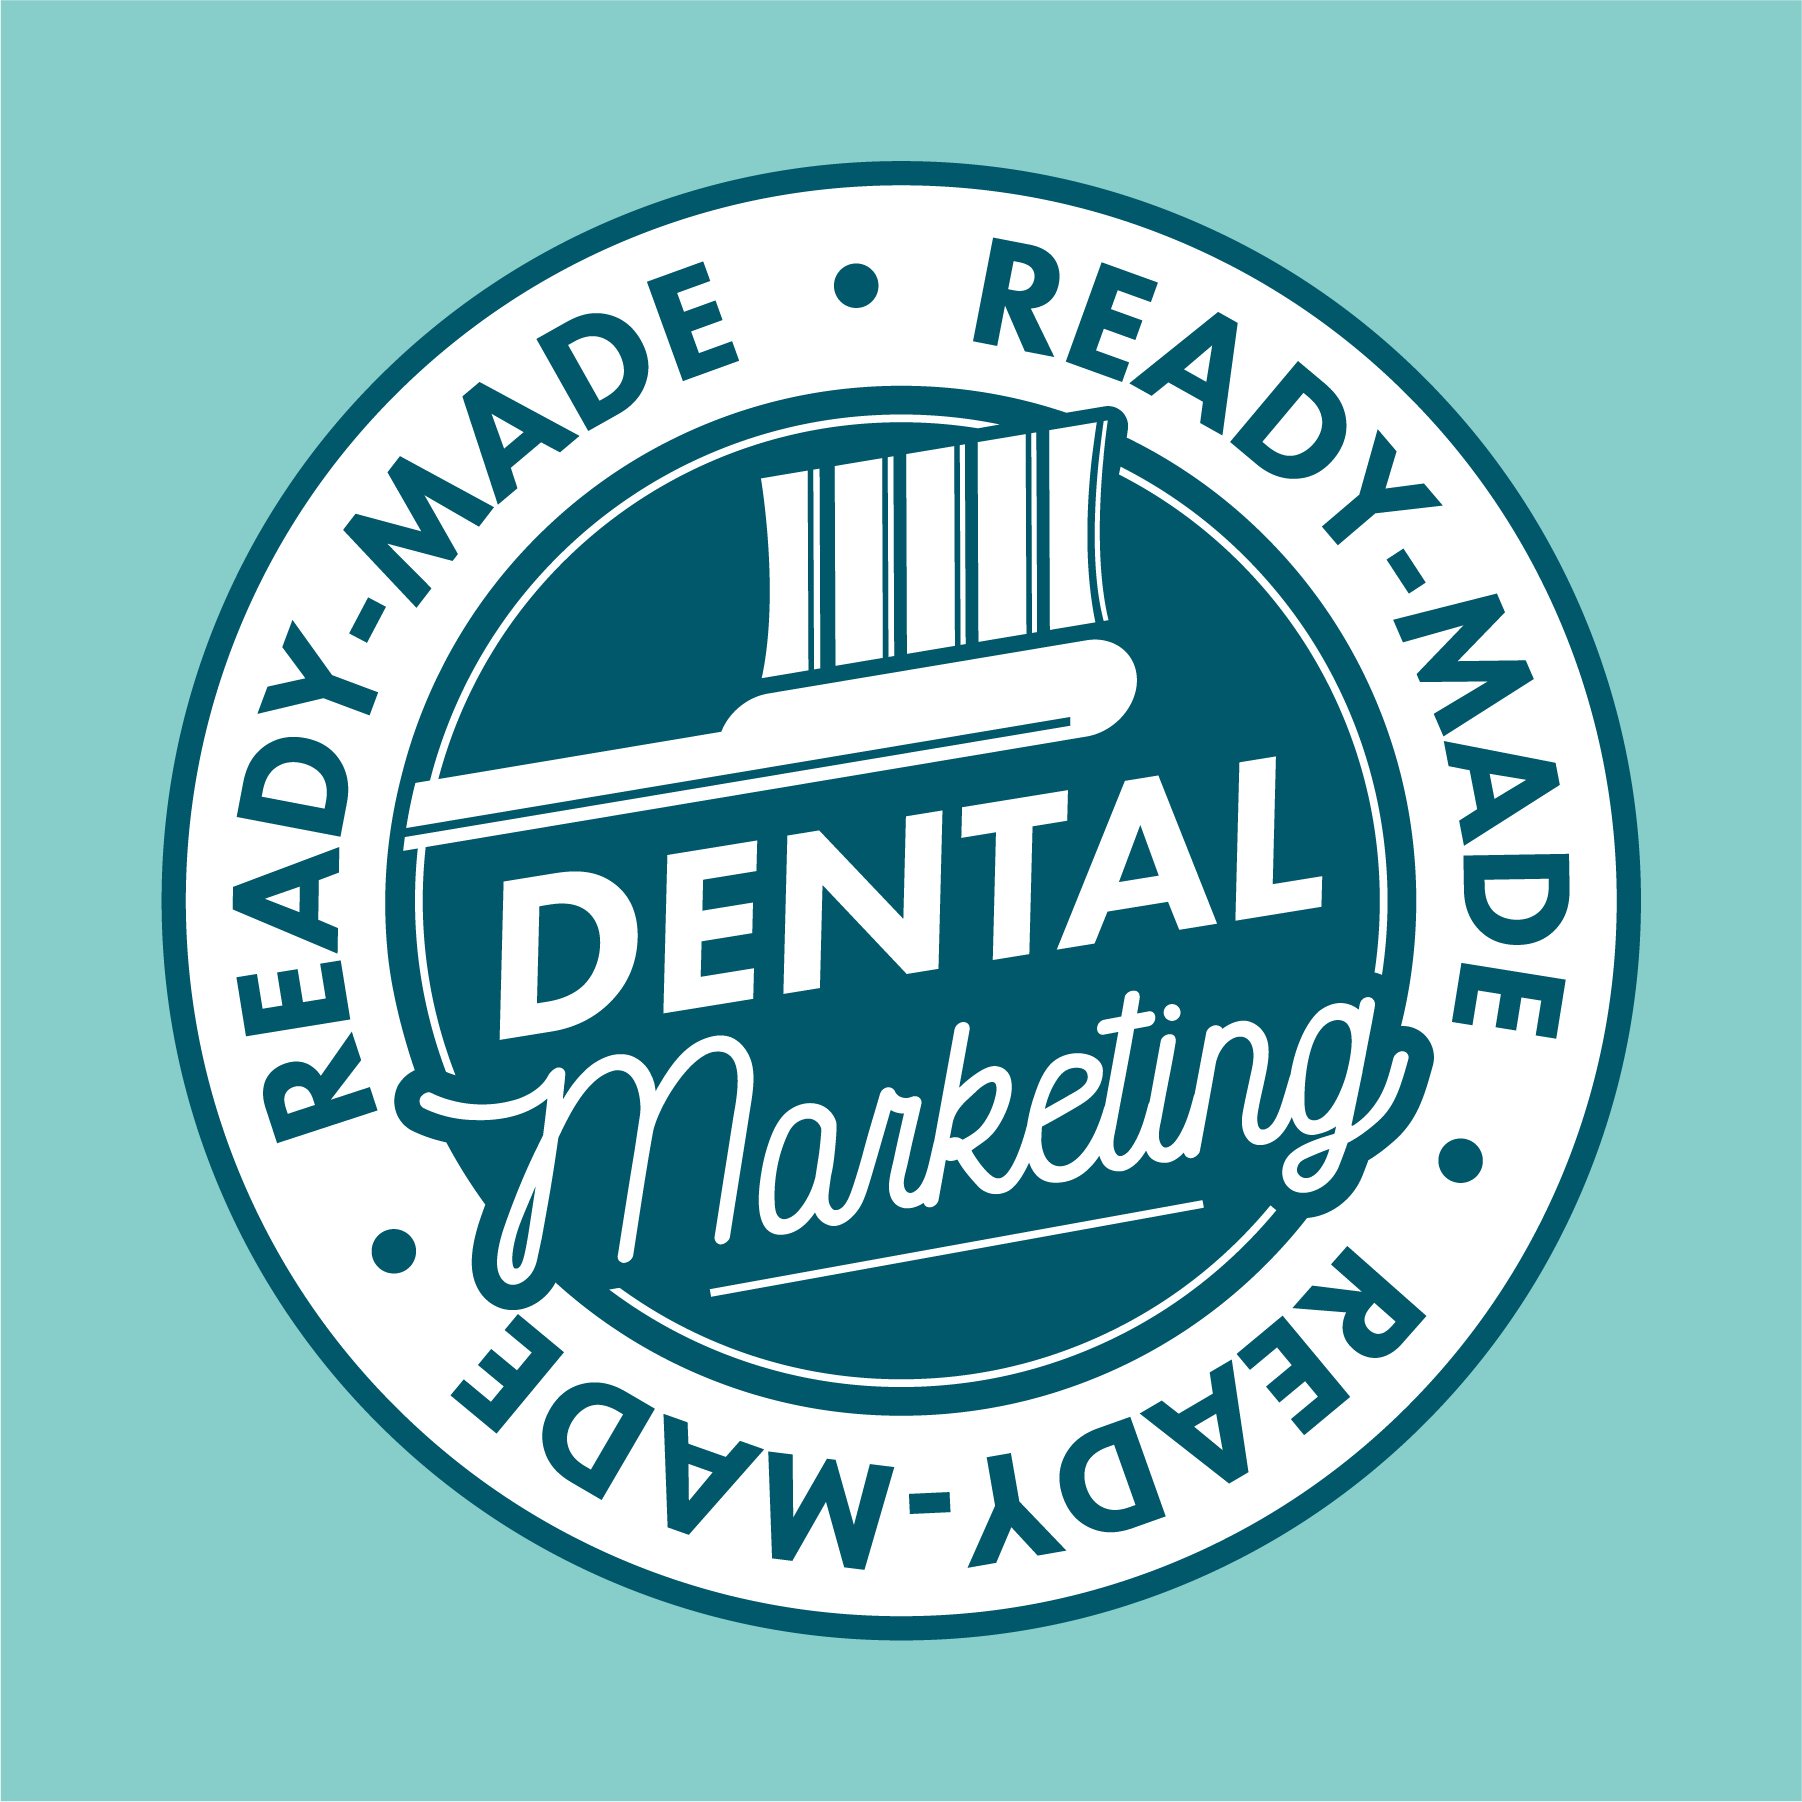 We make bundles of ready-to-post social media images for Dental Offices. No more worrying about what to post! Unlimited downloads $20/month.